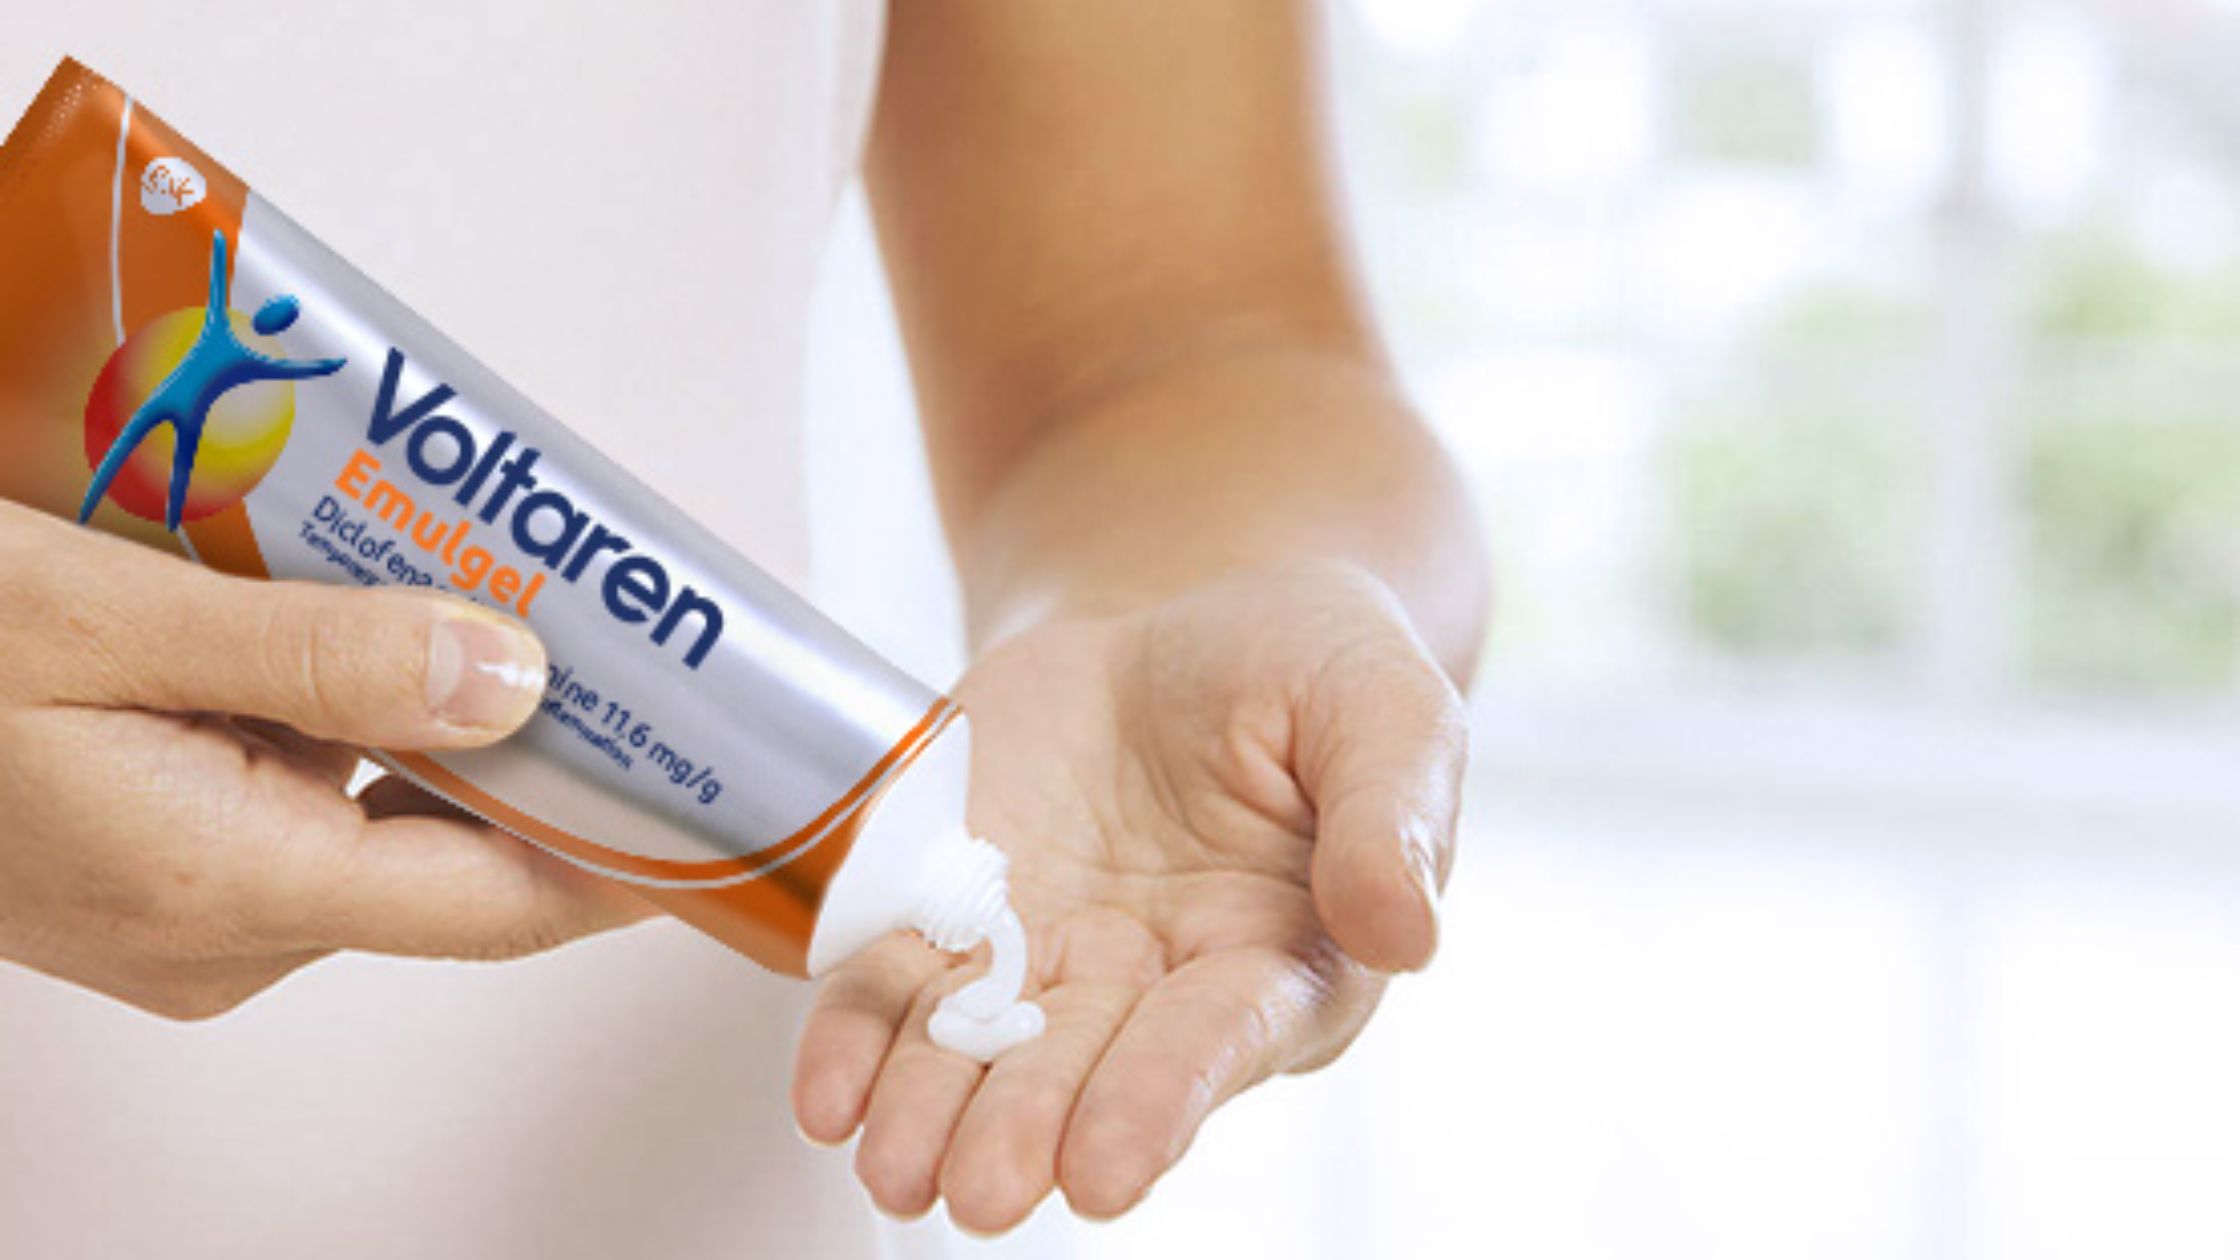 How to Use Voltaren Extra Strength Effectively